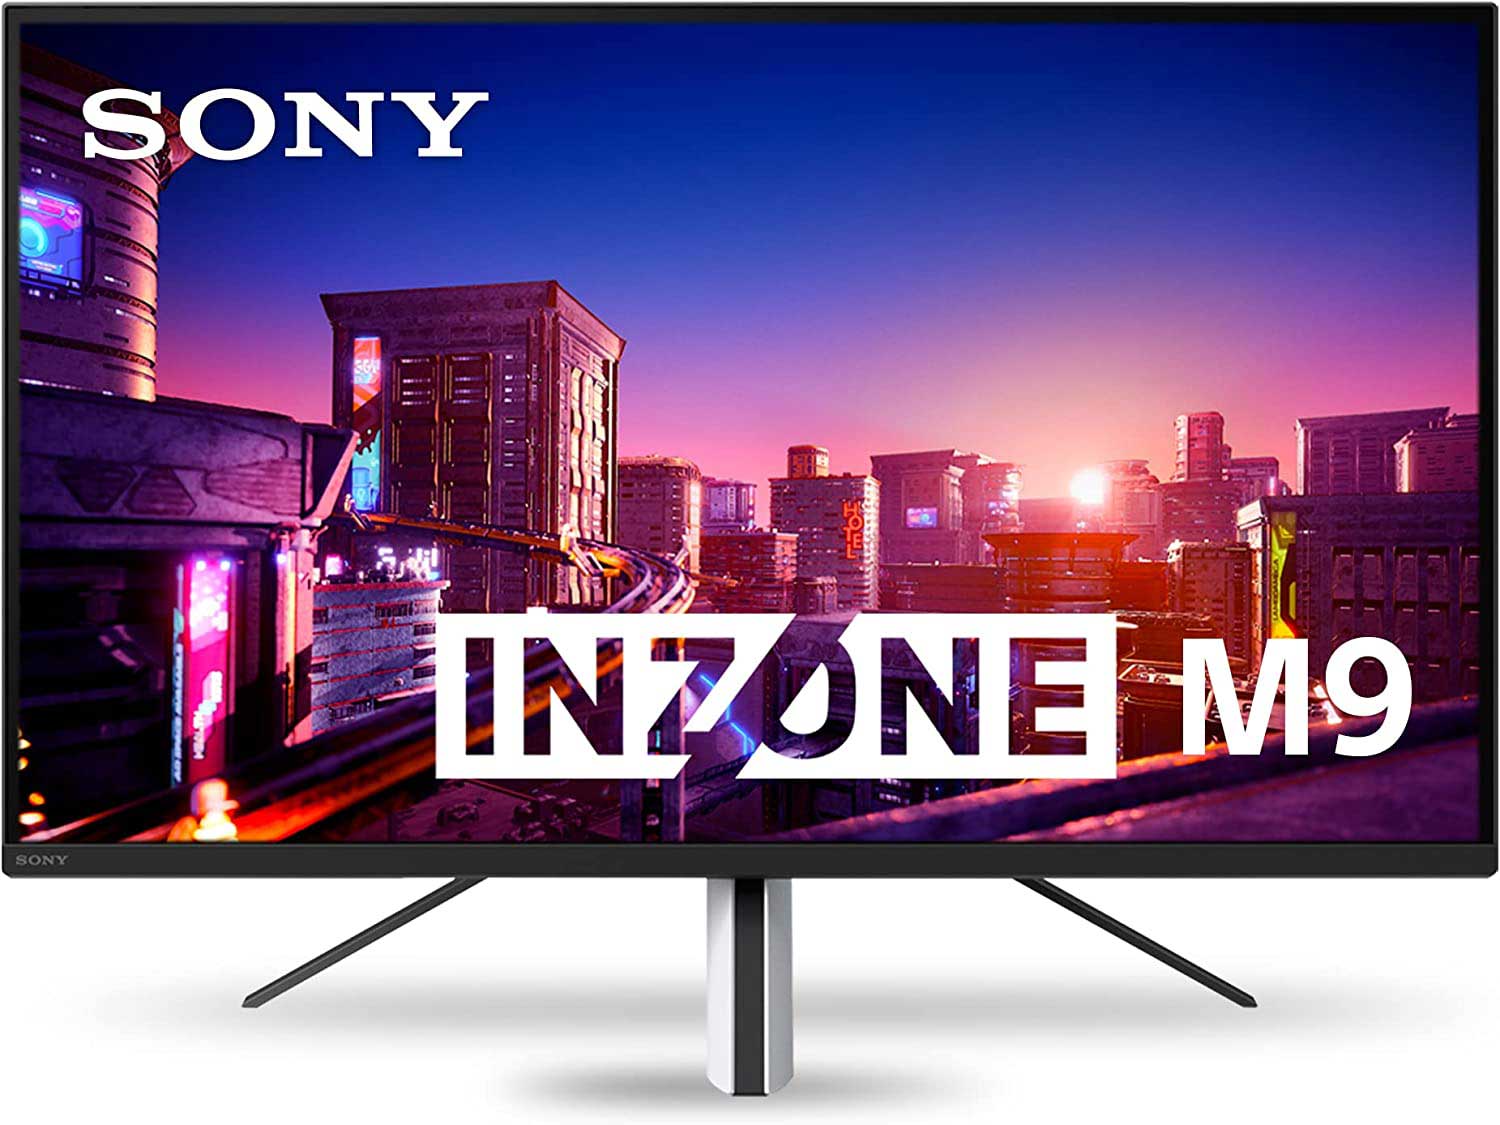 Sony INZONE M9 and M3 gaming monitors in PlayStation 5 design